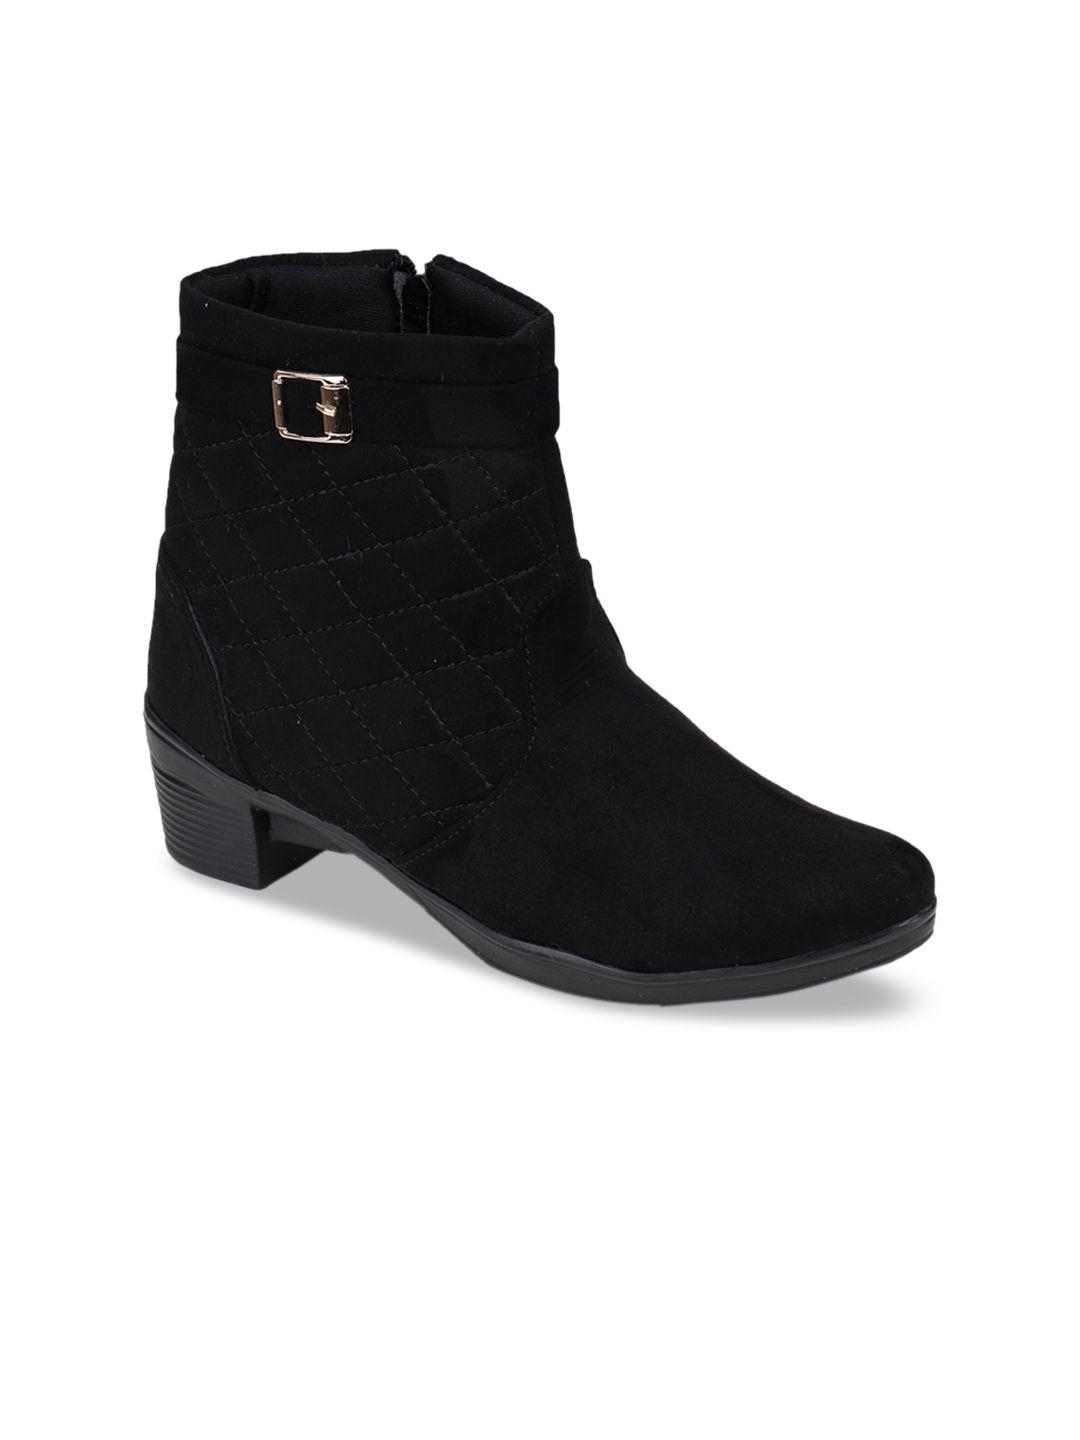 trase-women-black-solid-heeled-boots